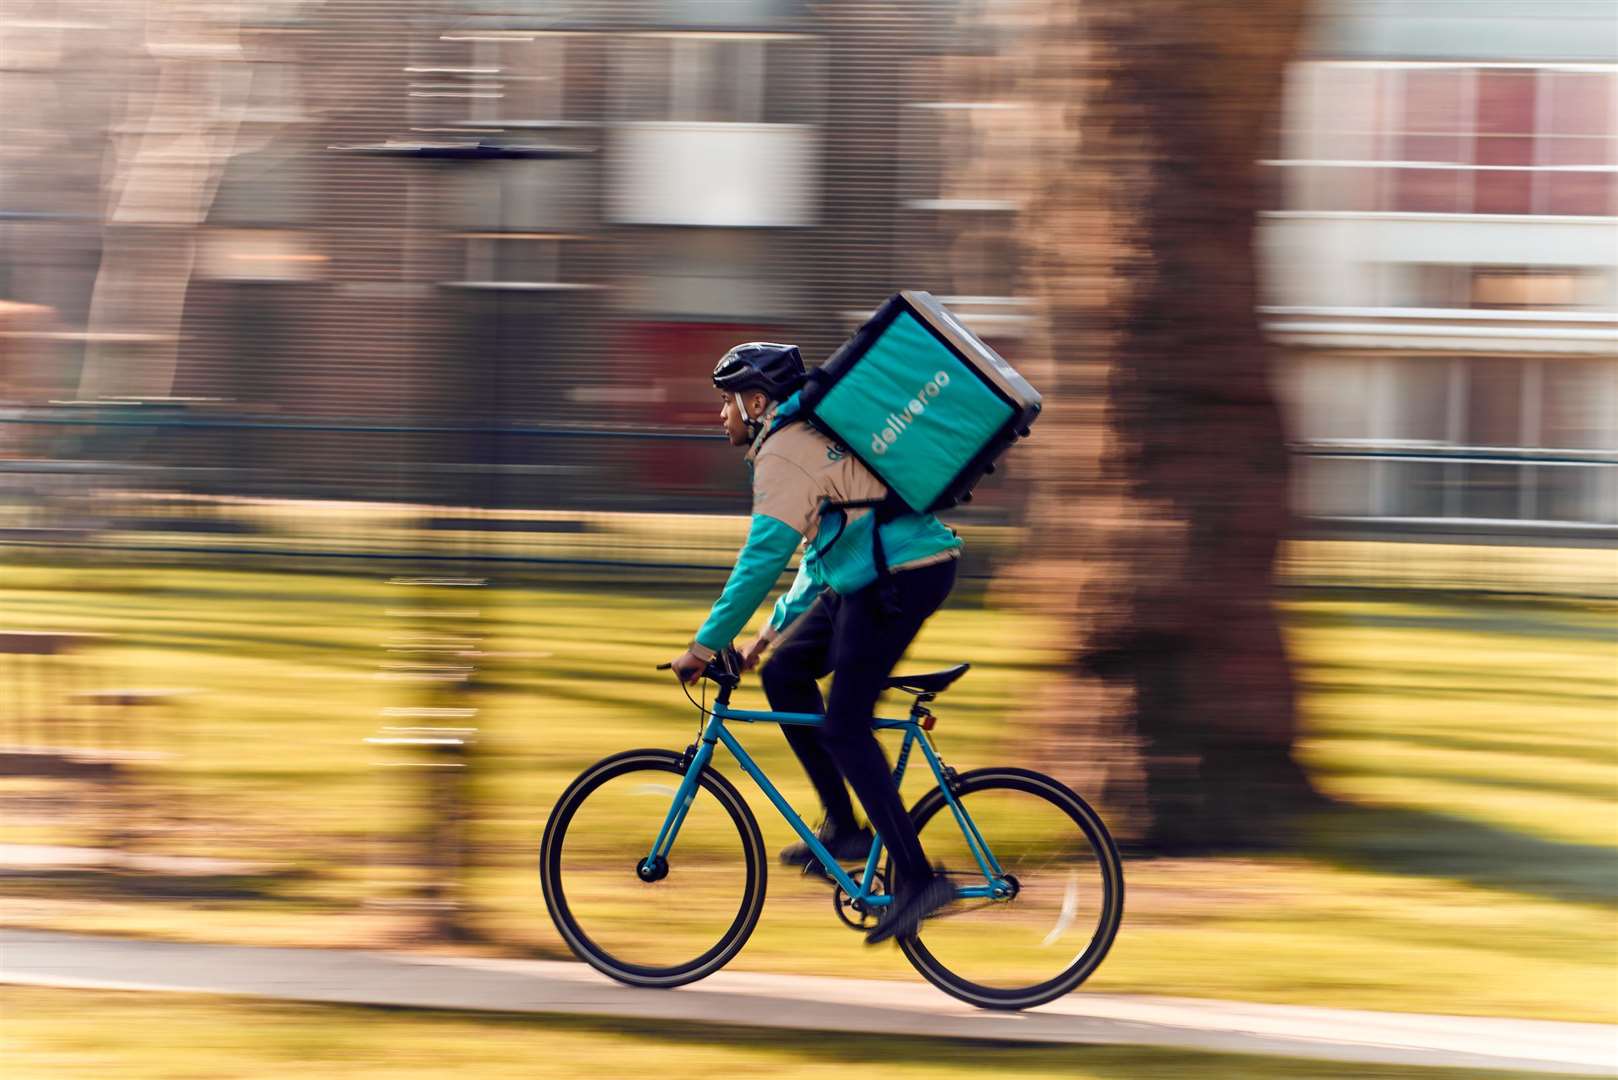 Deliveroo PR library imagery.© Mikael Buck / Deliveroo. (11915370)